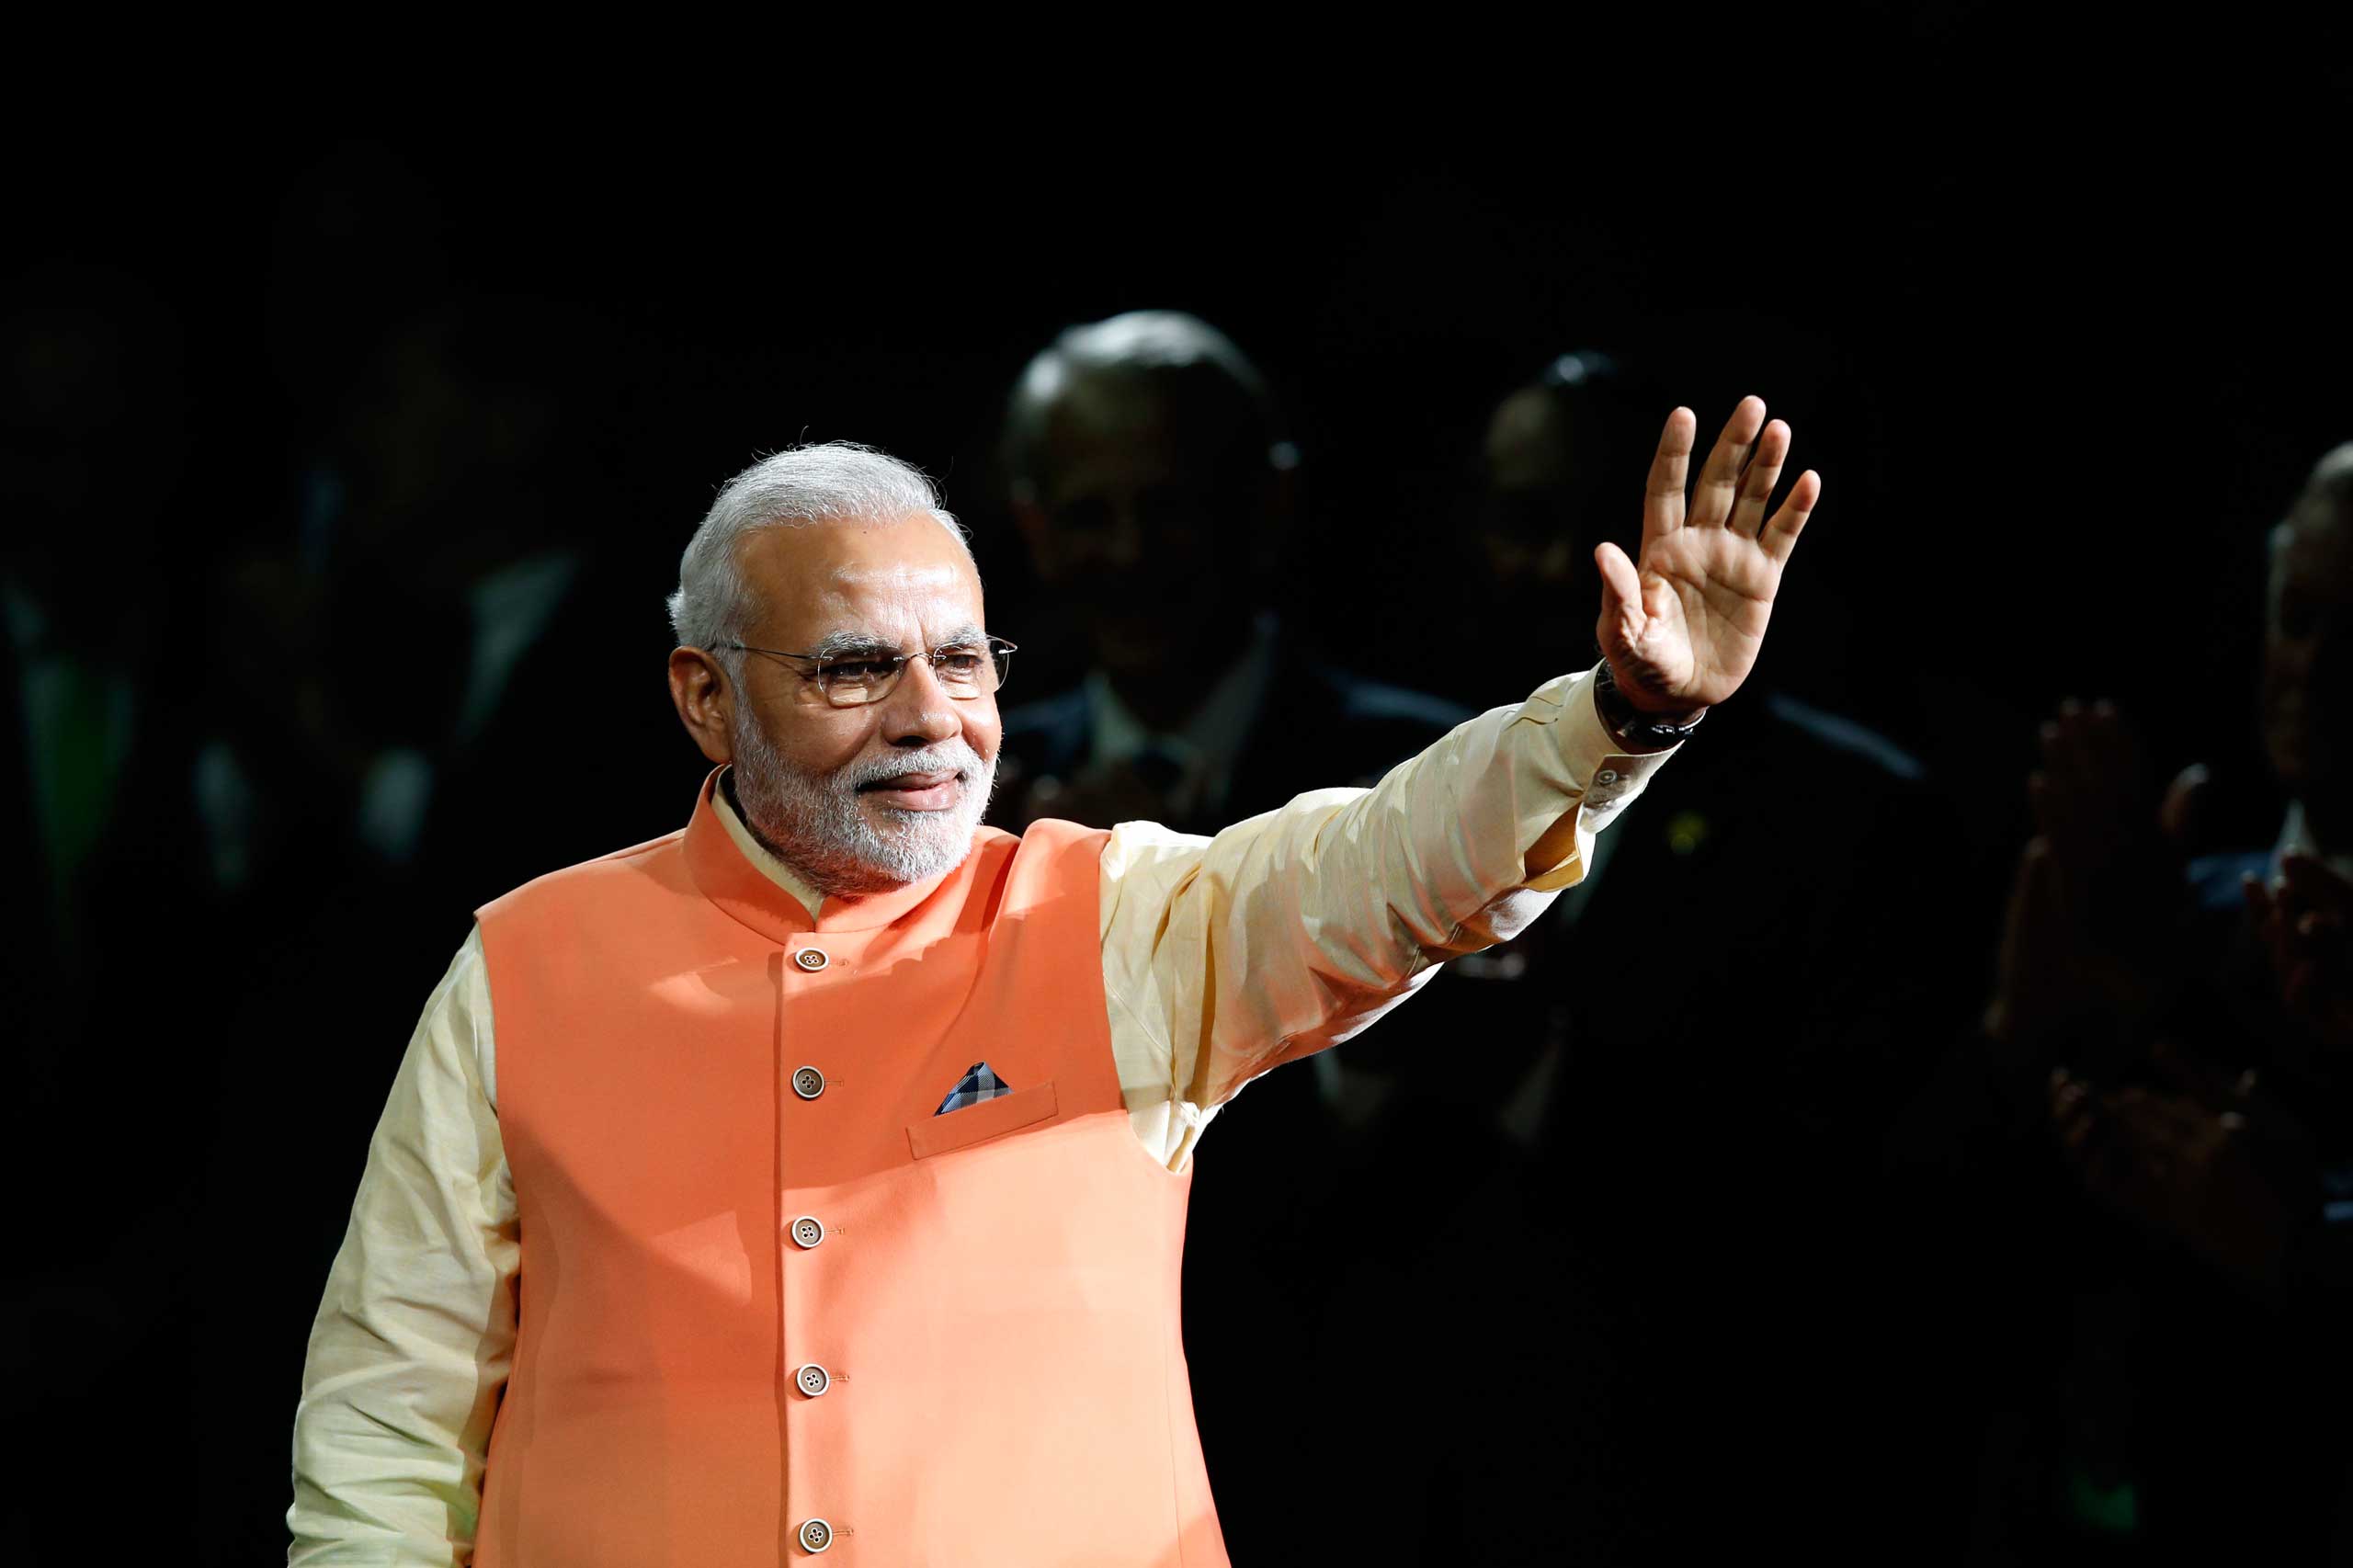 Prime Minister Narendra Modi of India waves to the crowd as he arrives to give a speech during a reception by the Indian community in honor of his visit to the United States at Madison Square Garden, Sept. 28, 2014, in New York. (Jason DeCrow—AP)